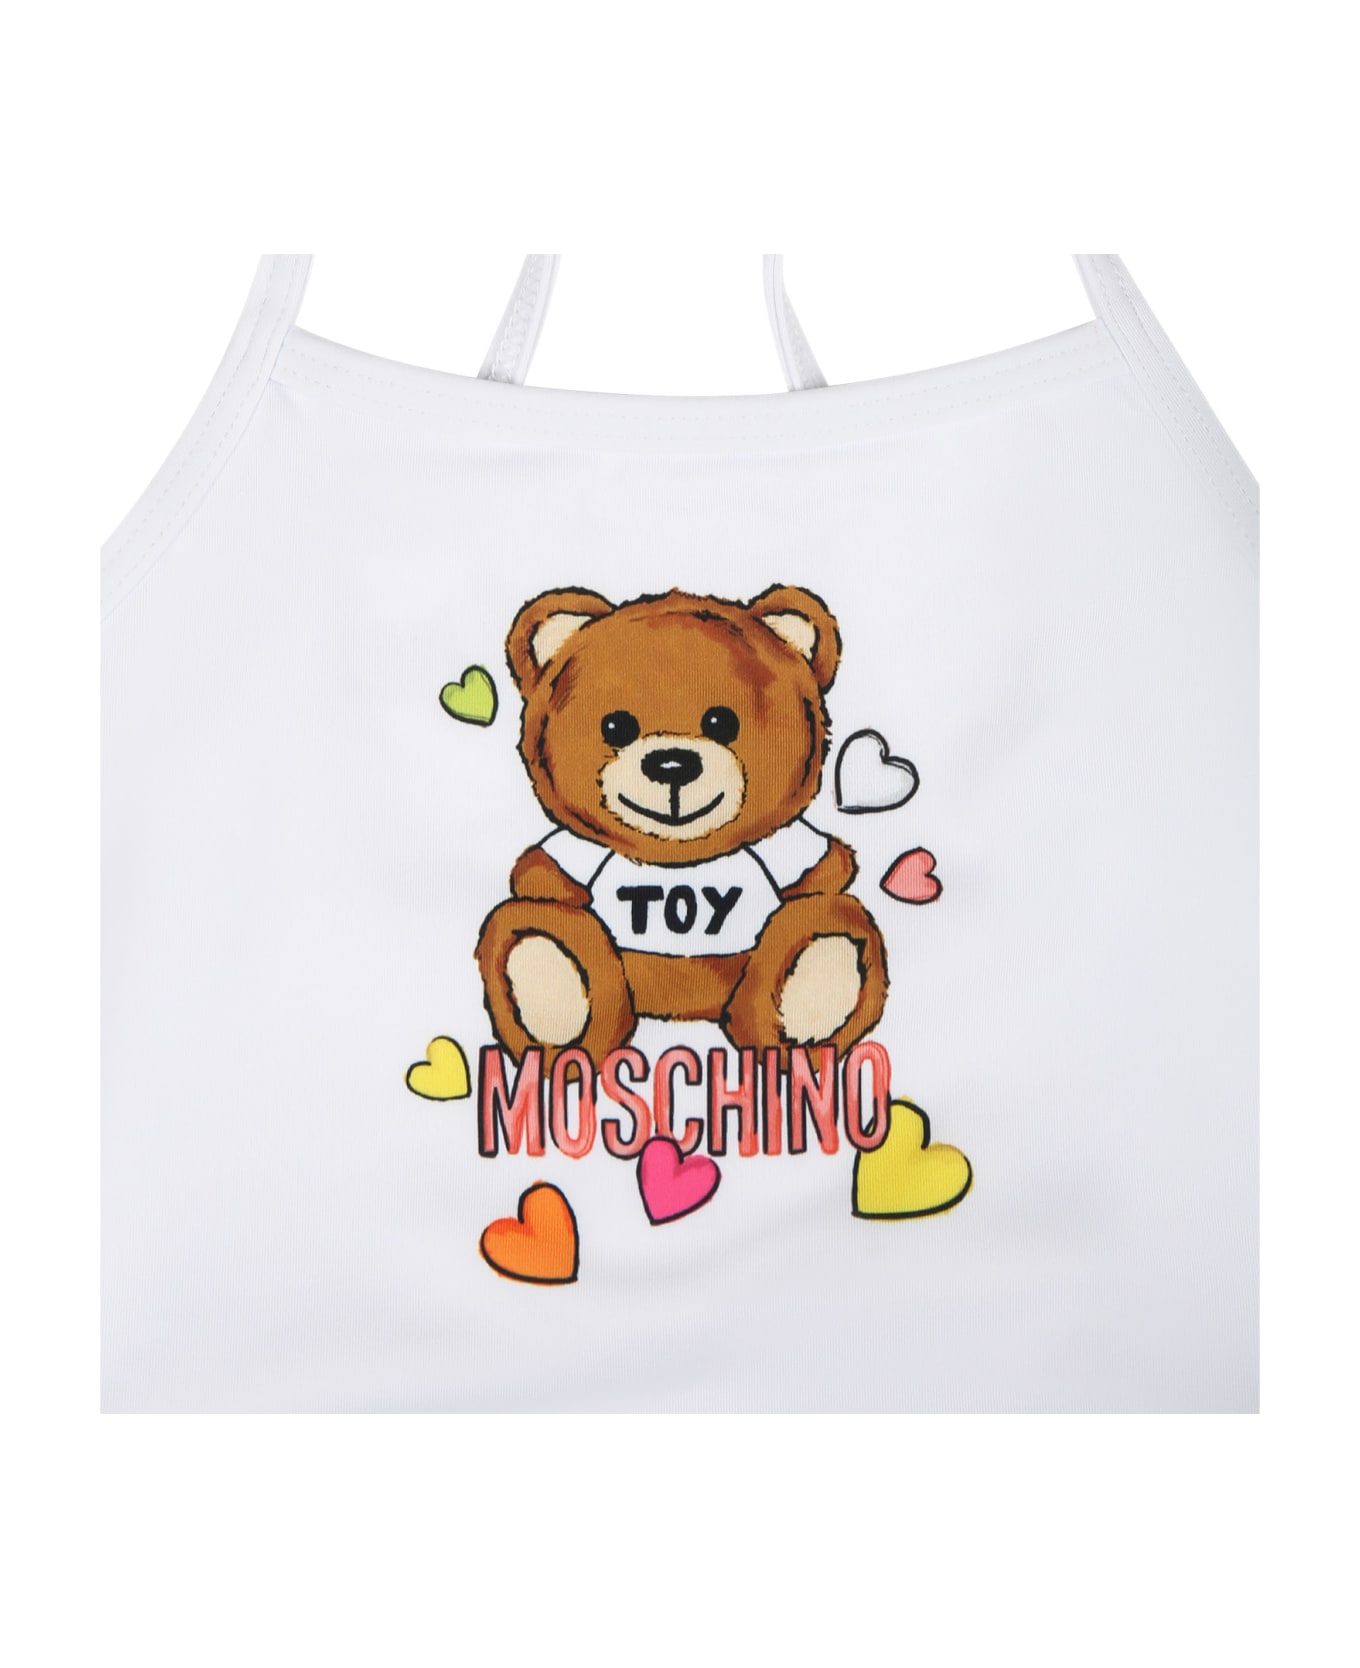 Moschino White Swimsuit For Baby Girl With Teddy Bear And Logo - White 水着